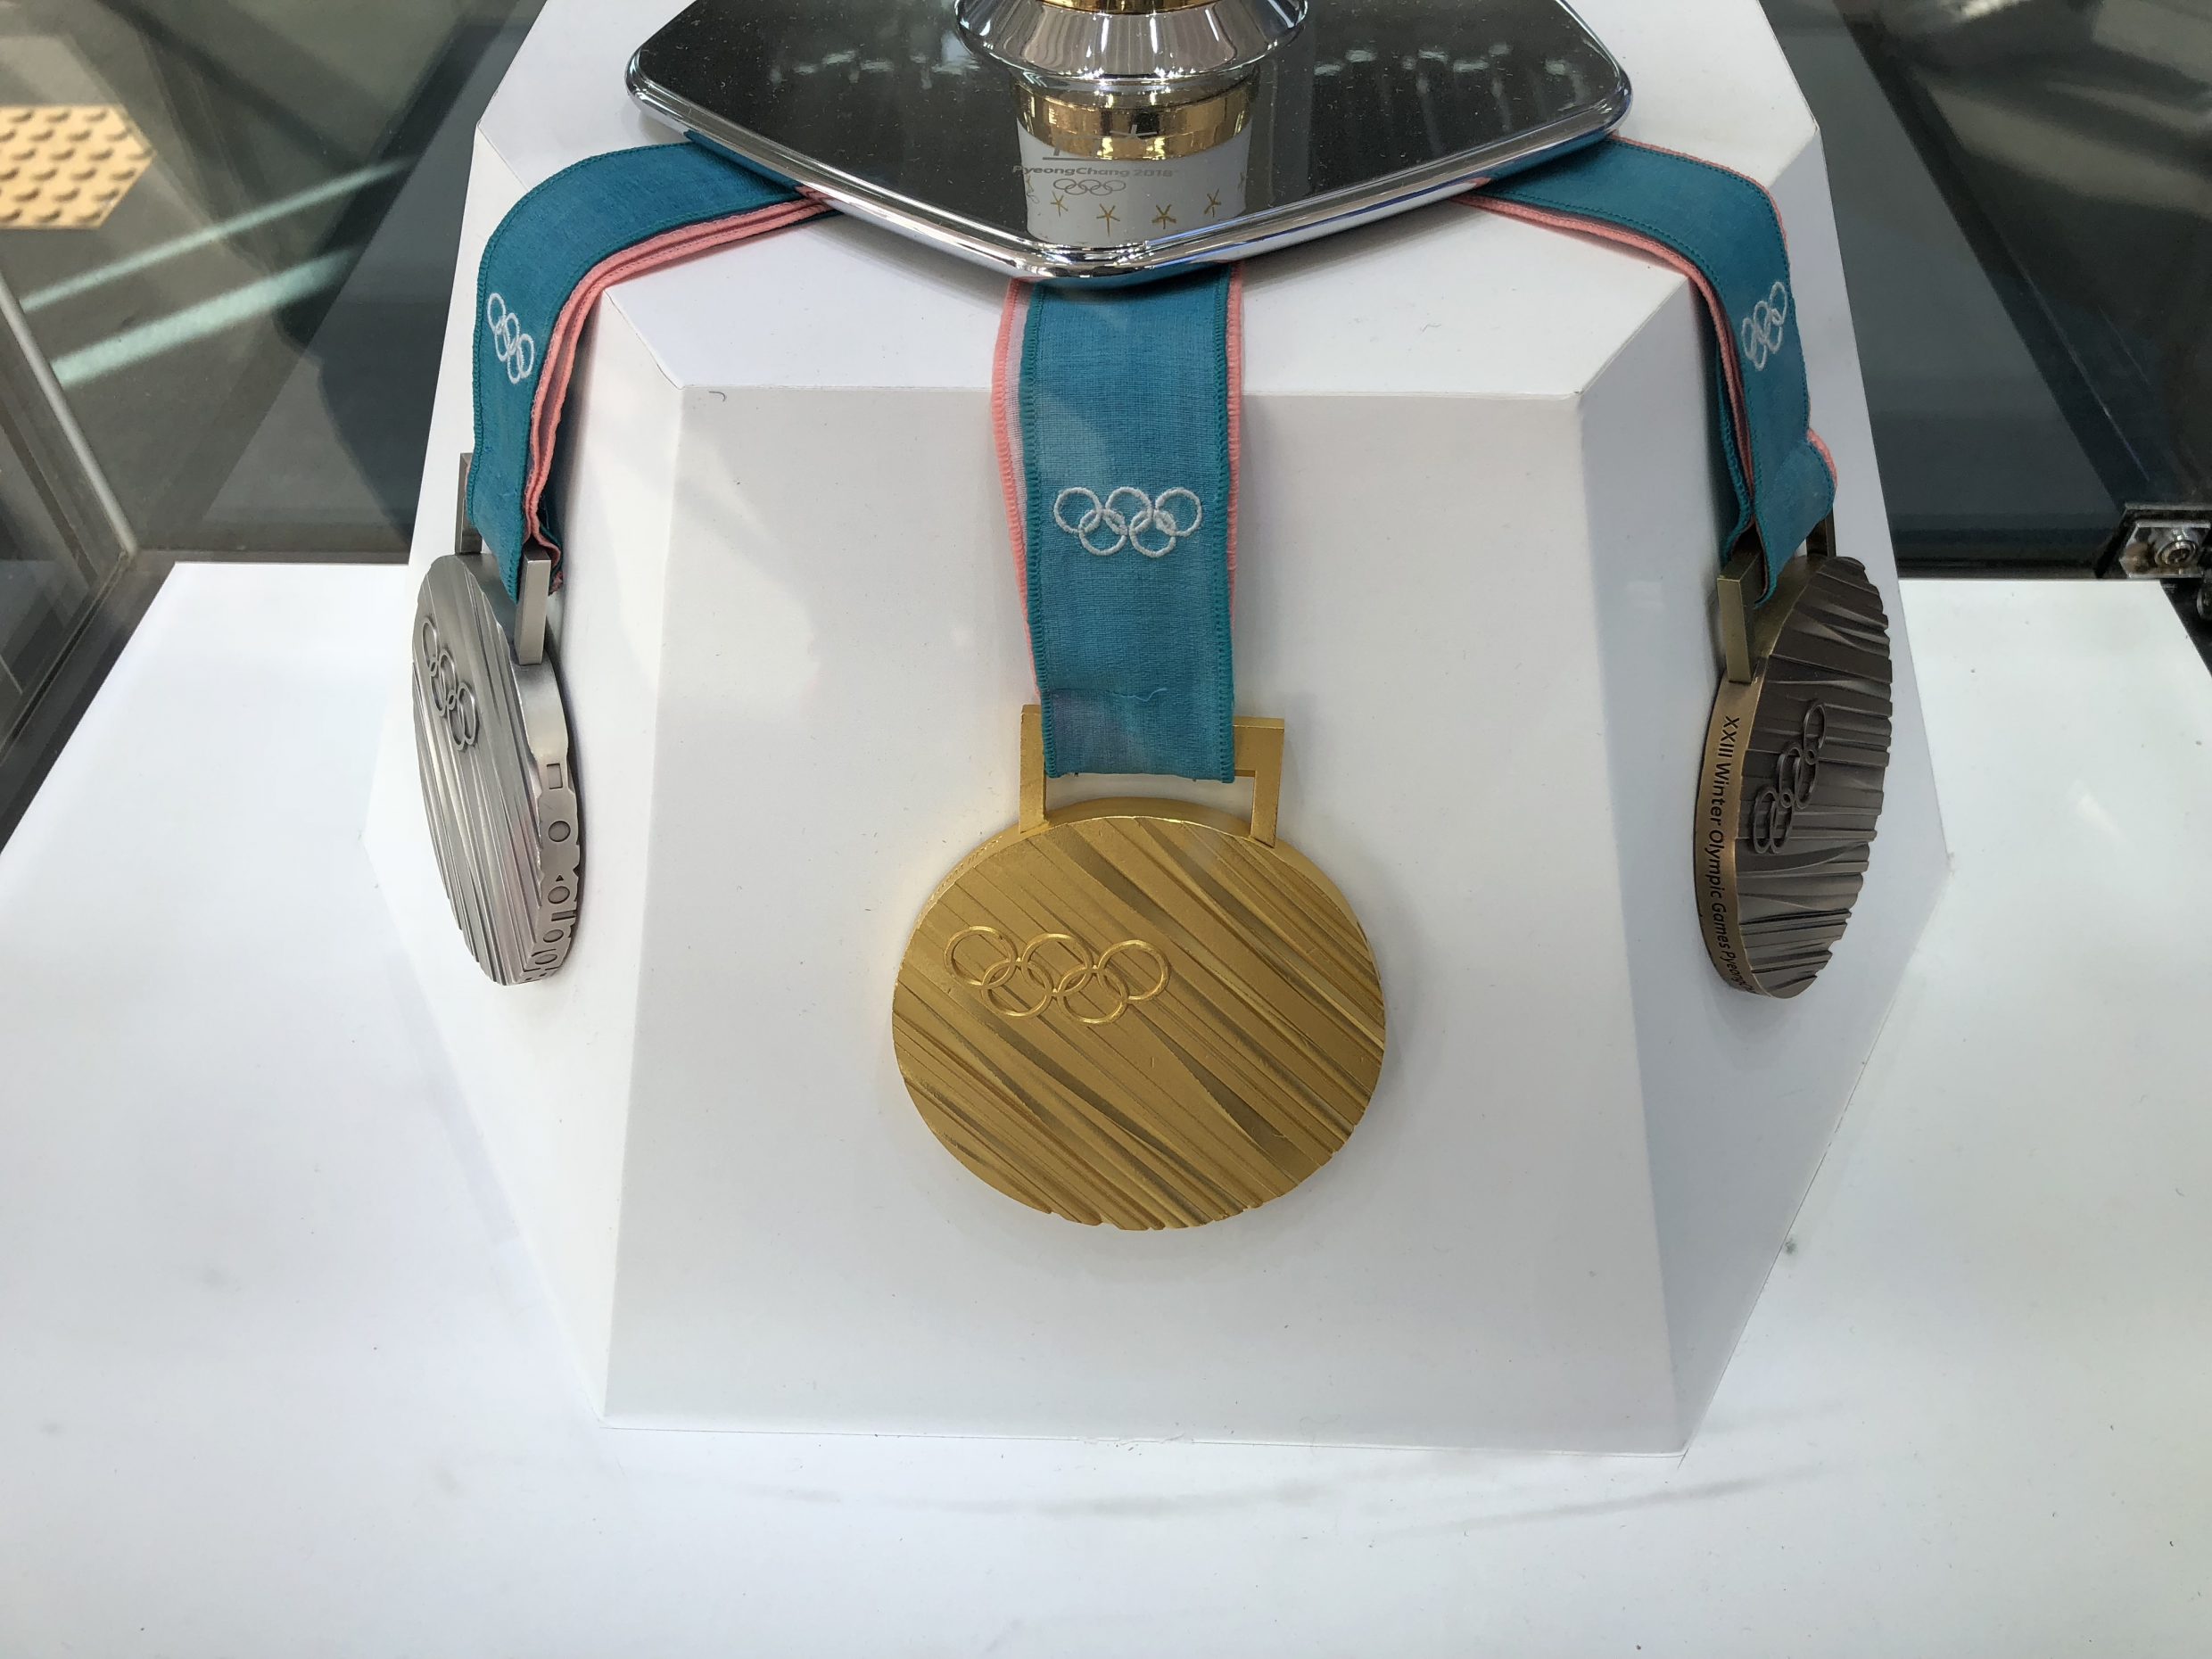 Medals at the 2018 Olympics